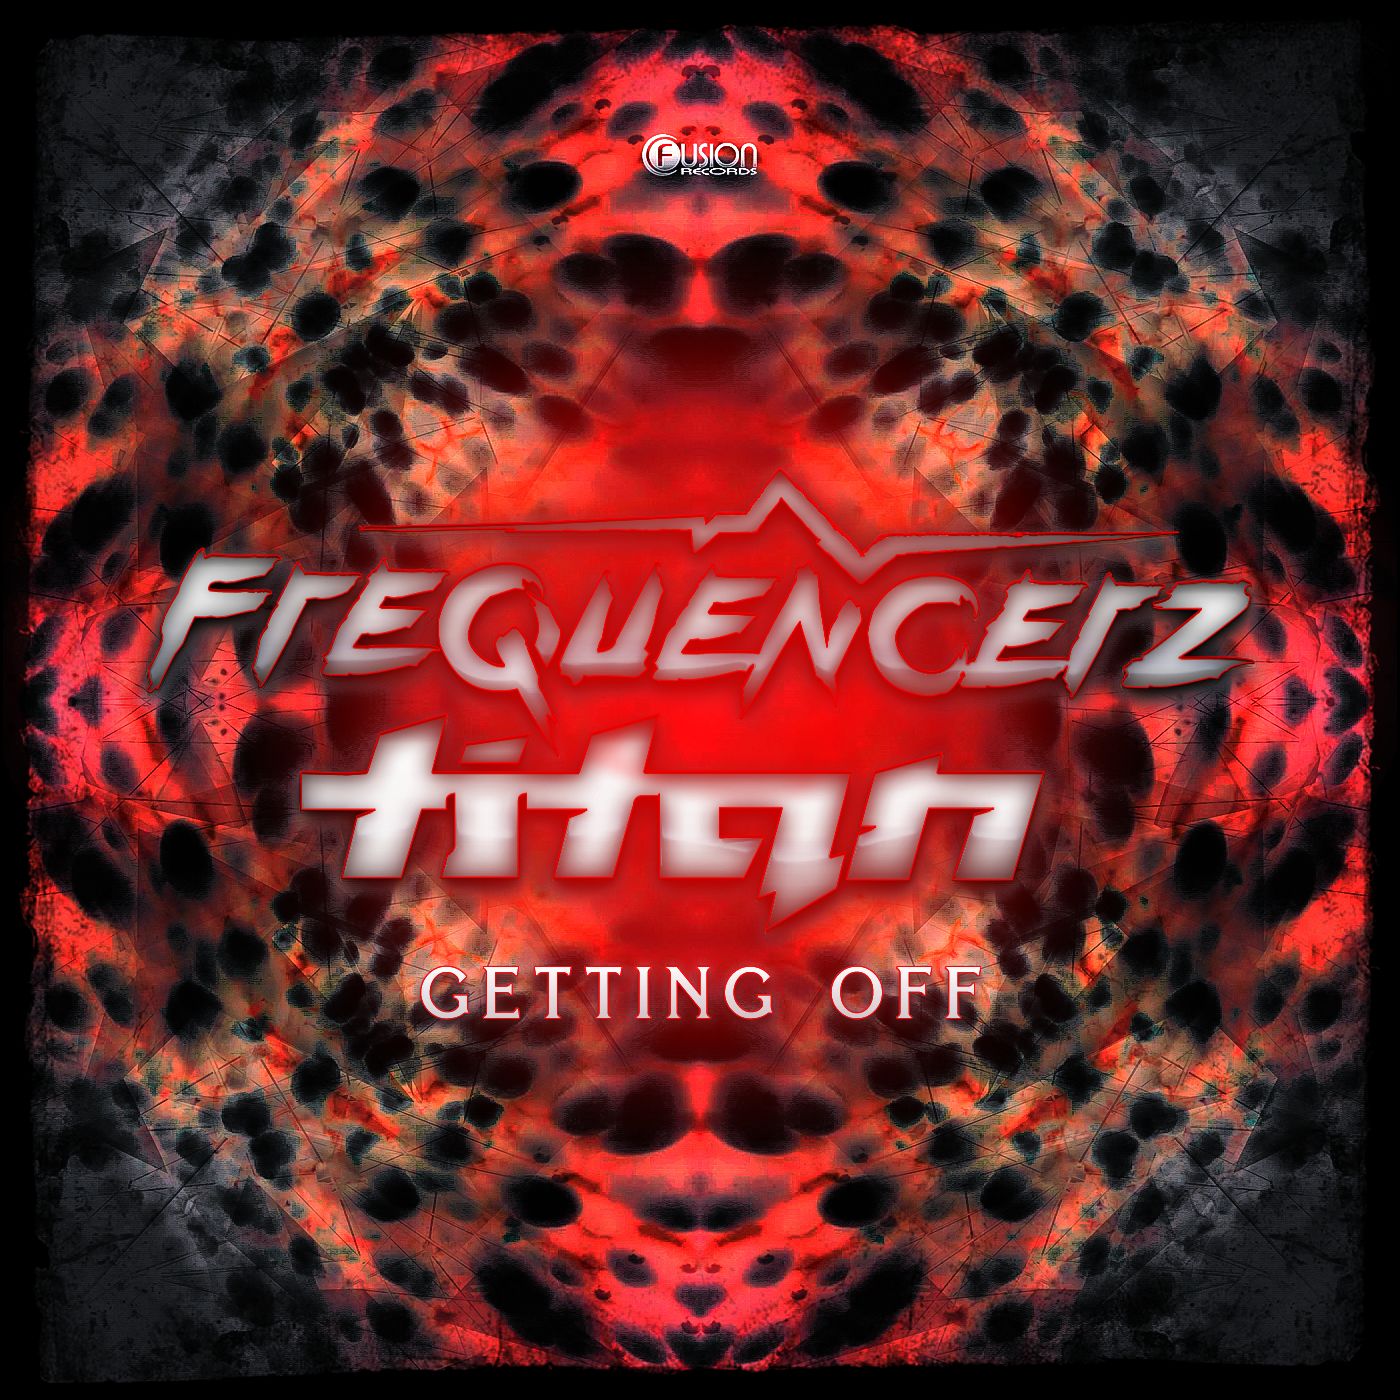 Frequencerz & Titan - Getting Off [FUSION RECORDS] FUSION269